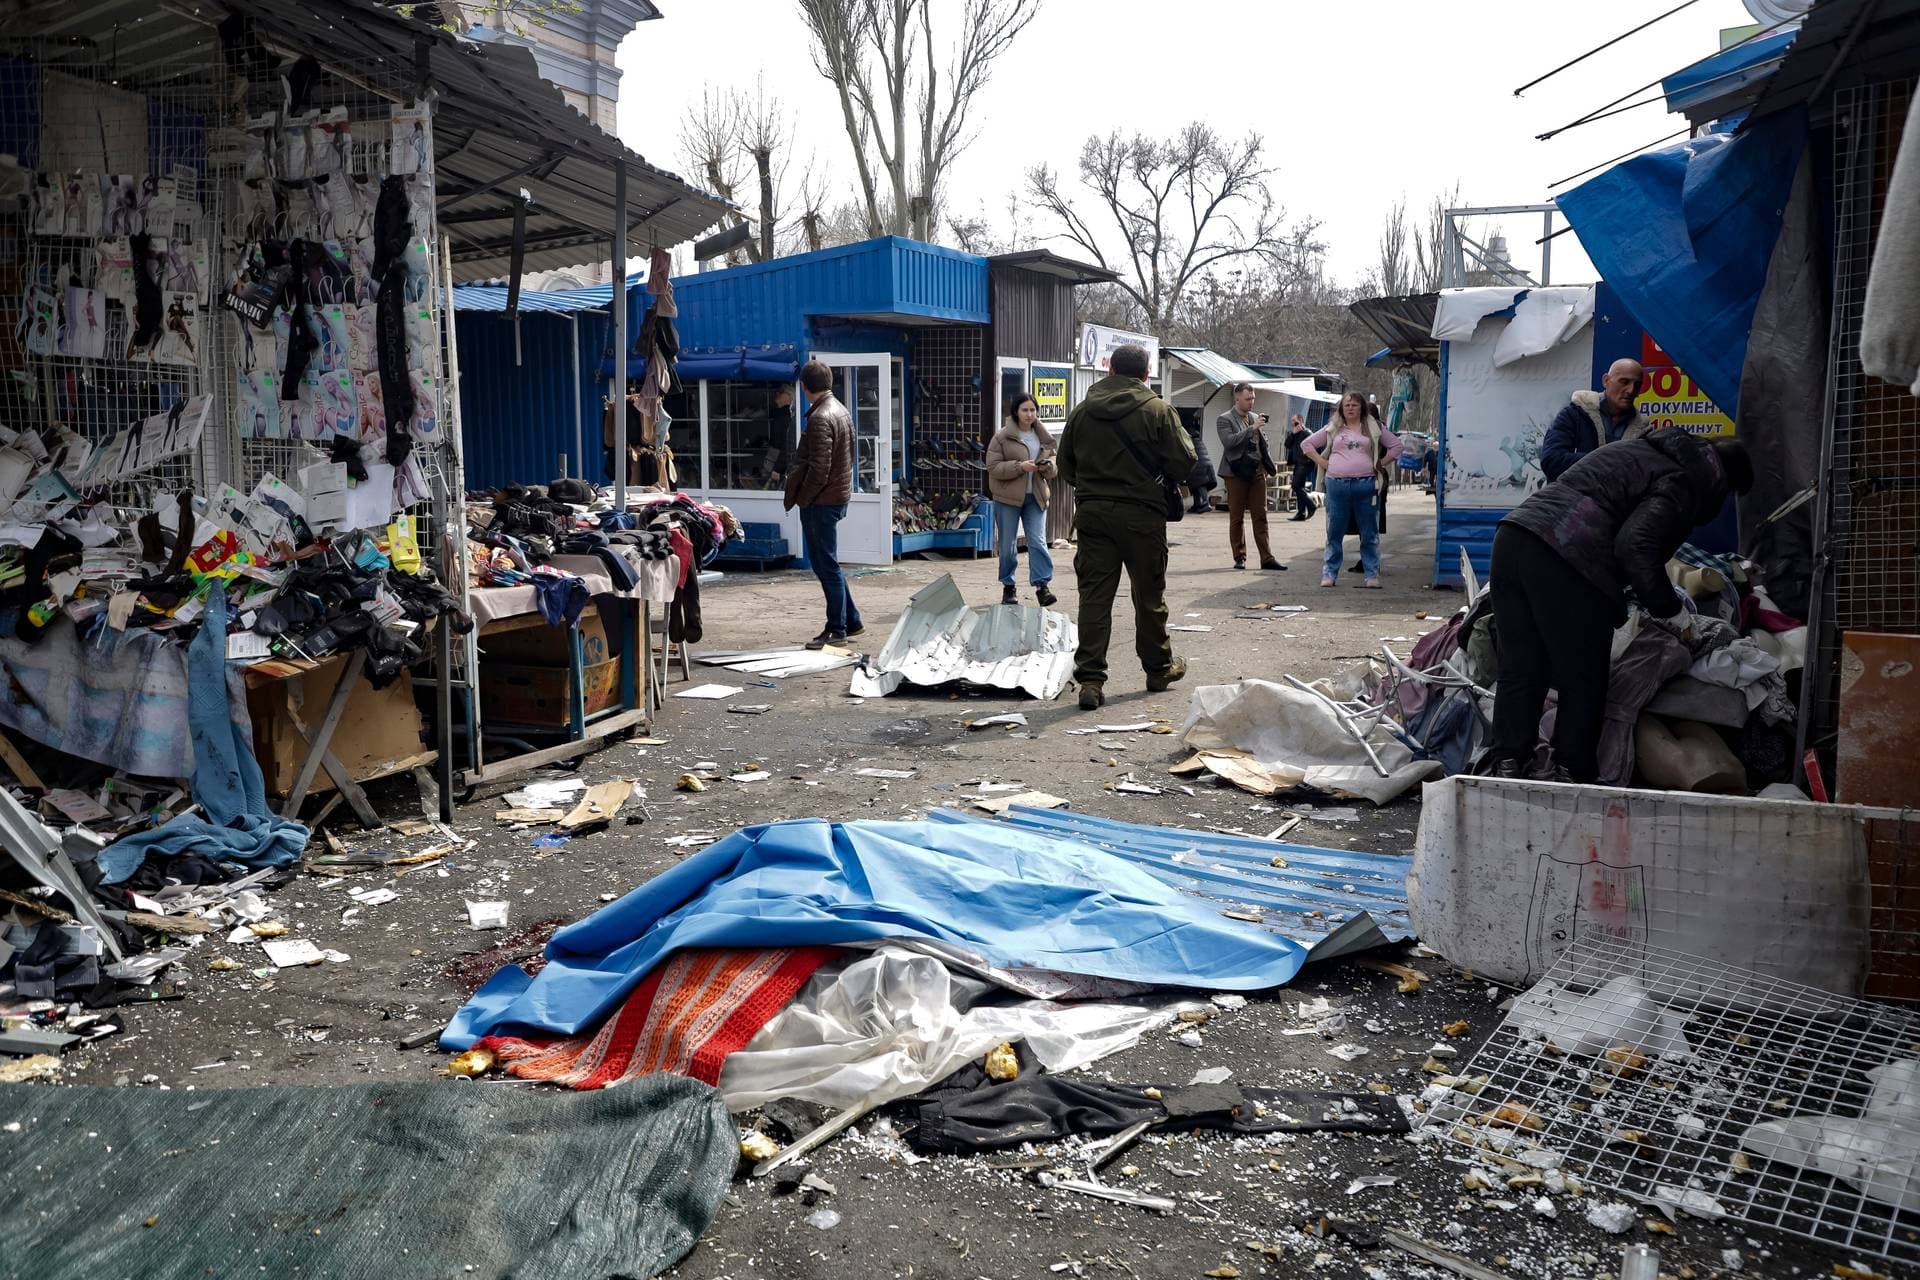 A lifeless body covered by plastic lies on the ground at a street market after the shelling in Donetsk